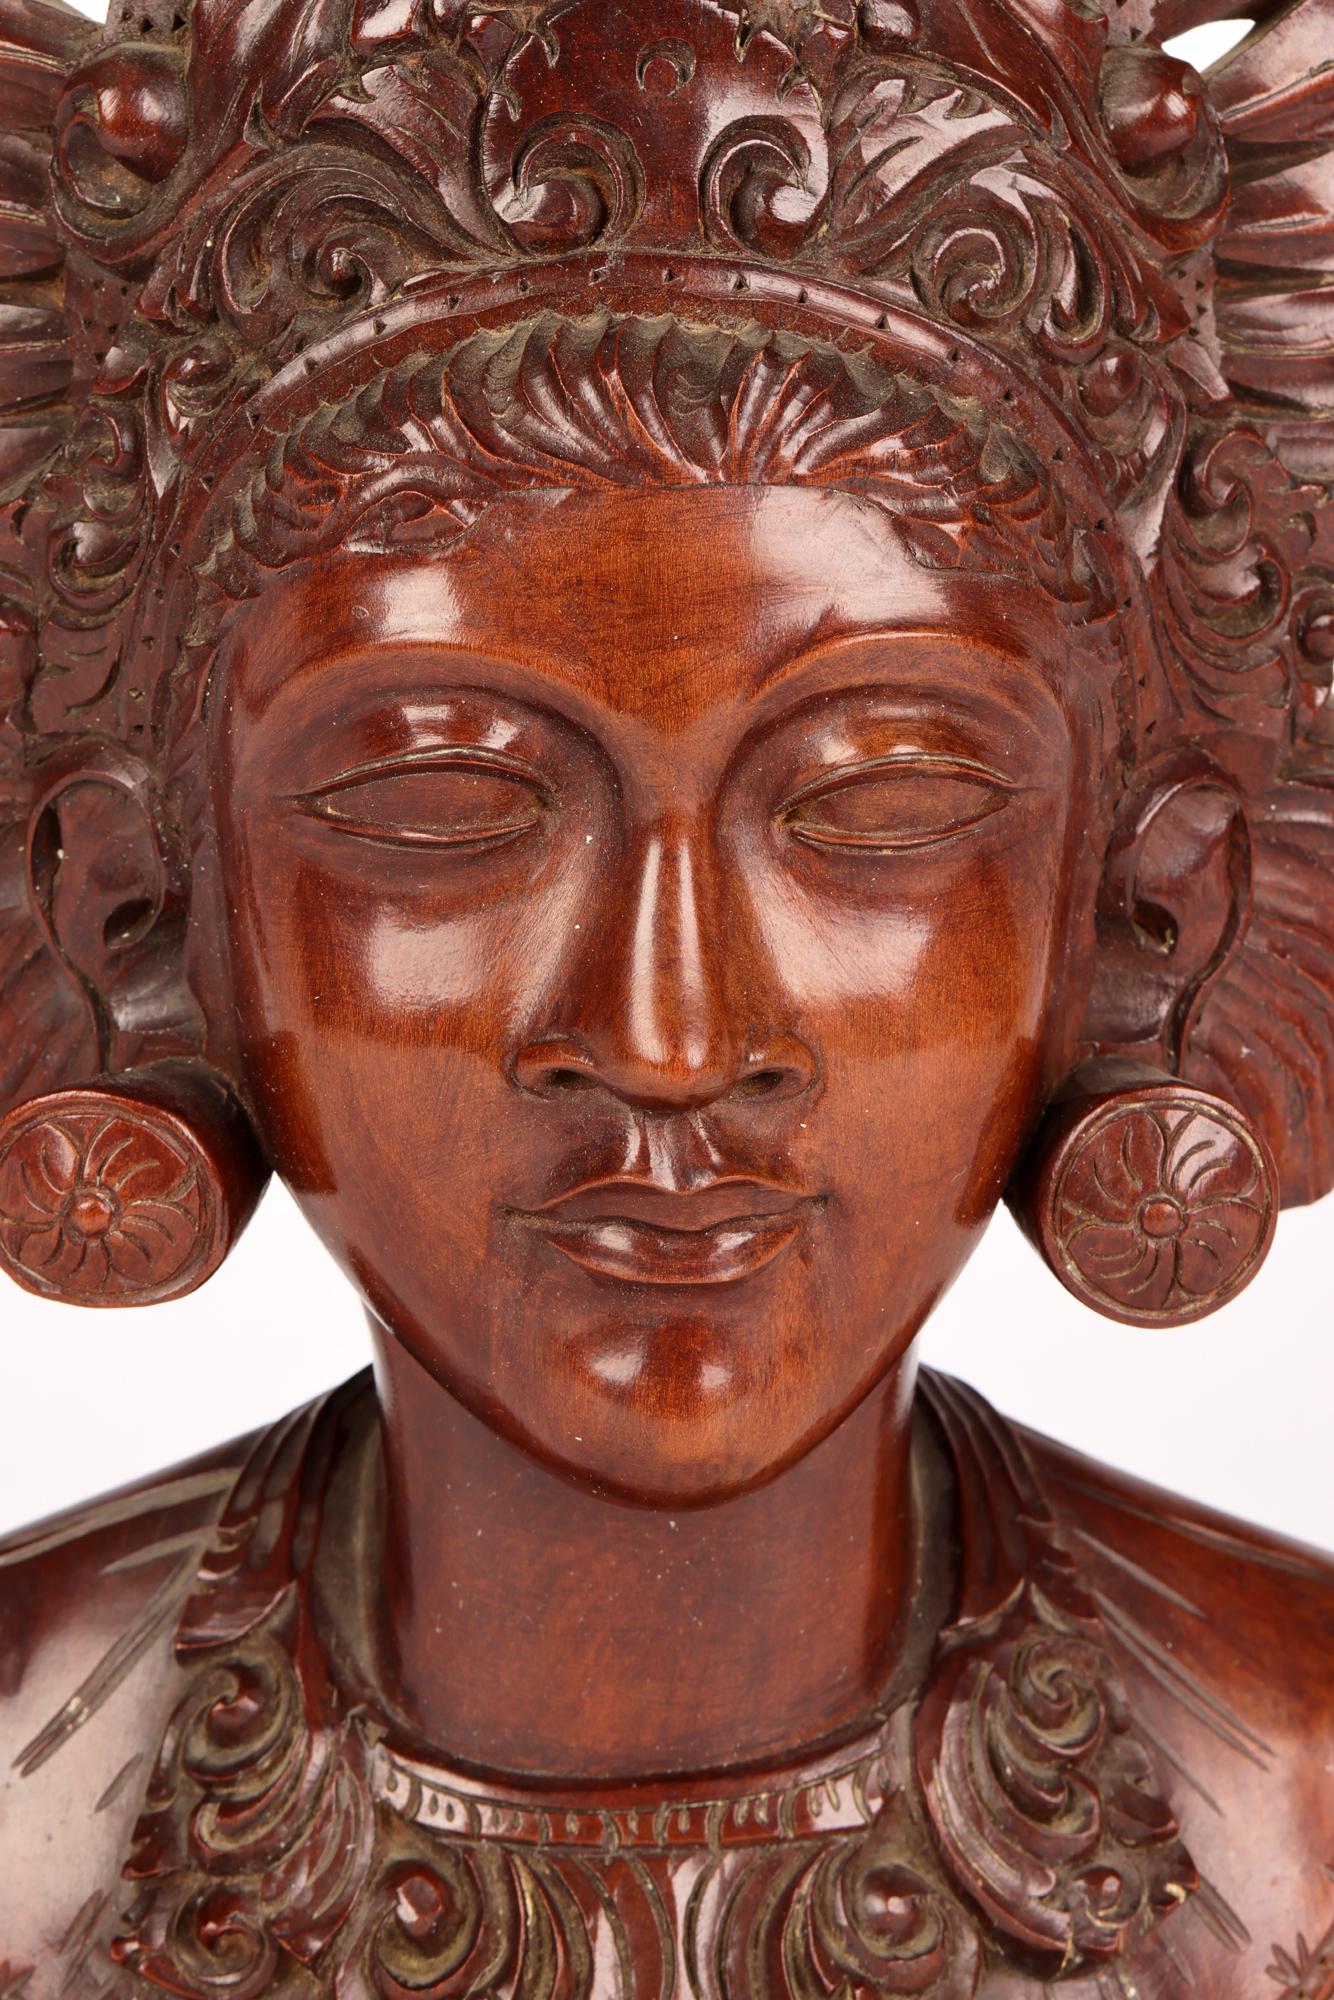 A well carved wooden portrait bust of a young girl wearing an elaborate headdress carved by a Balinese artist around the mid 20th century. The bust is carved from a single piece if wood, possibly sandal wood, and is well carved with good detail